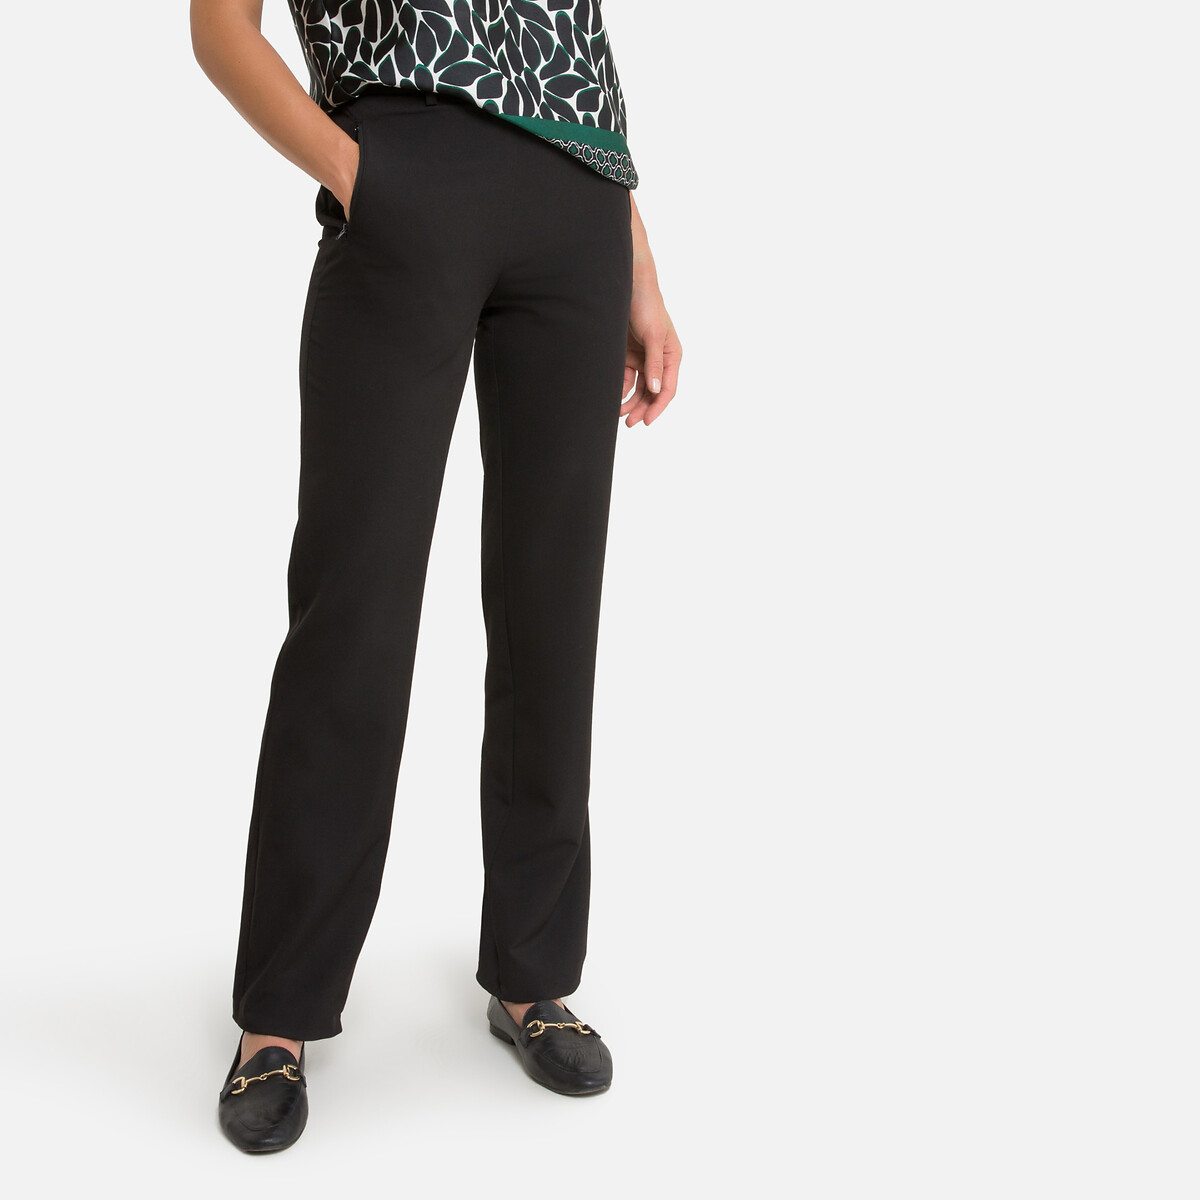 Image of Recycled Straight Trousers, Length 31.5"